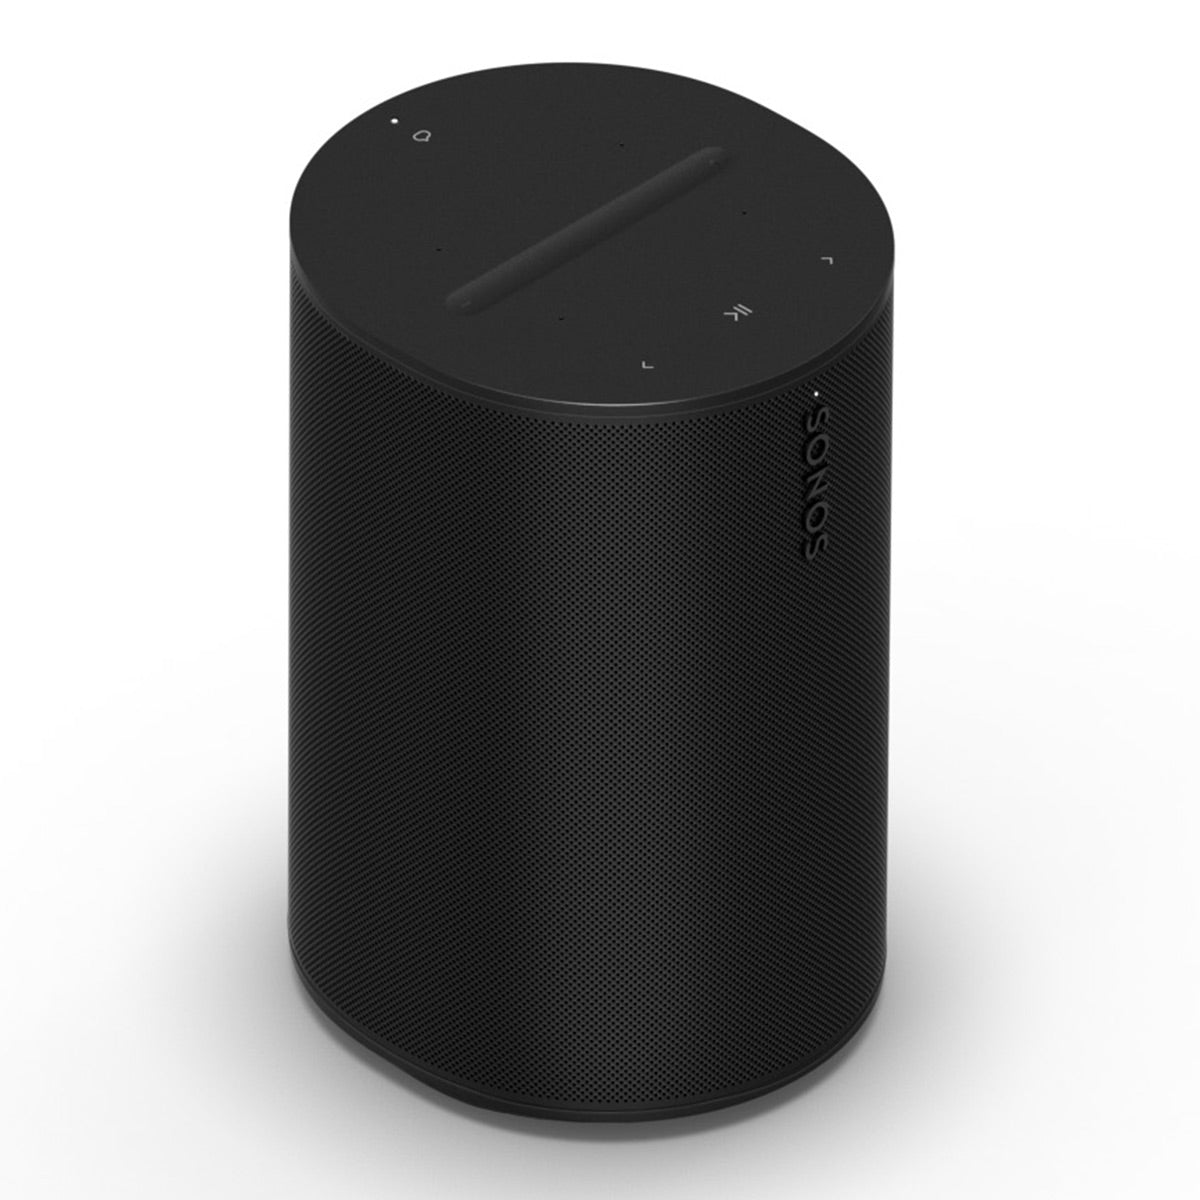 Bluetooth, Sonos World Acoustic Tuning Wide | Alexa & with Stereo Amazon Speaker Smart Technology, Trueplay 100 (Black) Built-In Wireless Era Voice-Controlled